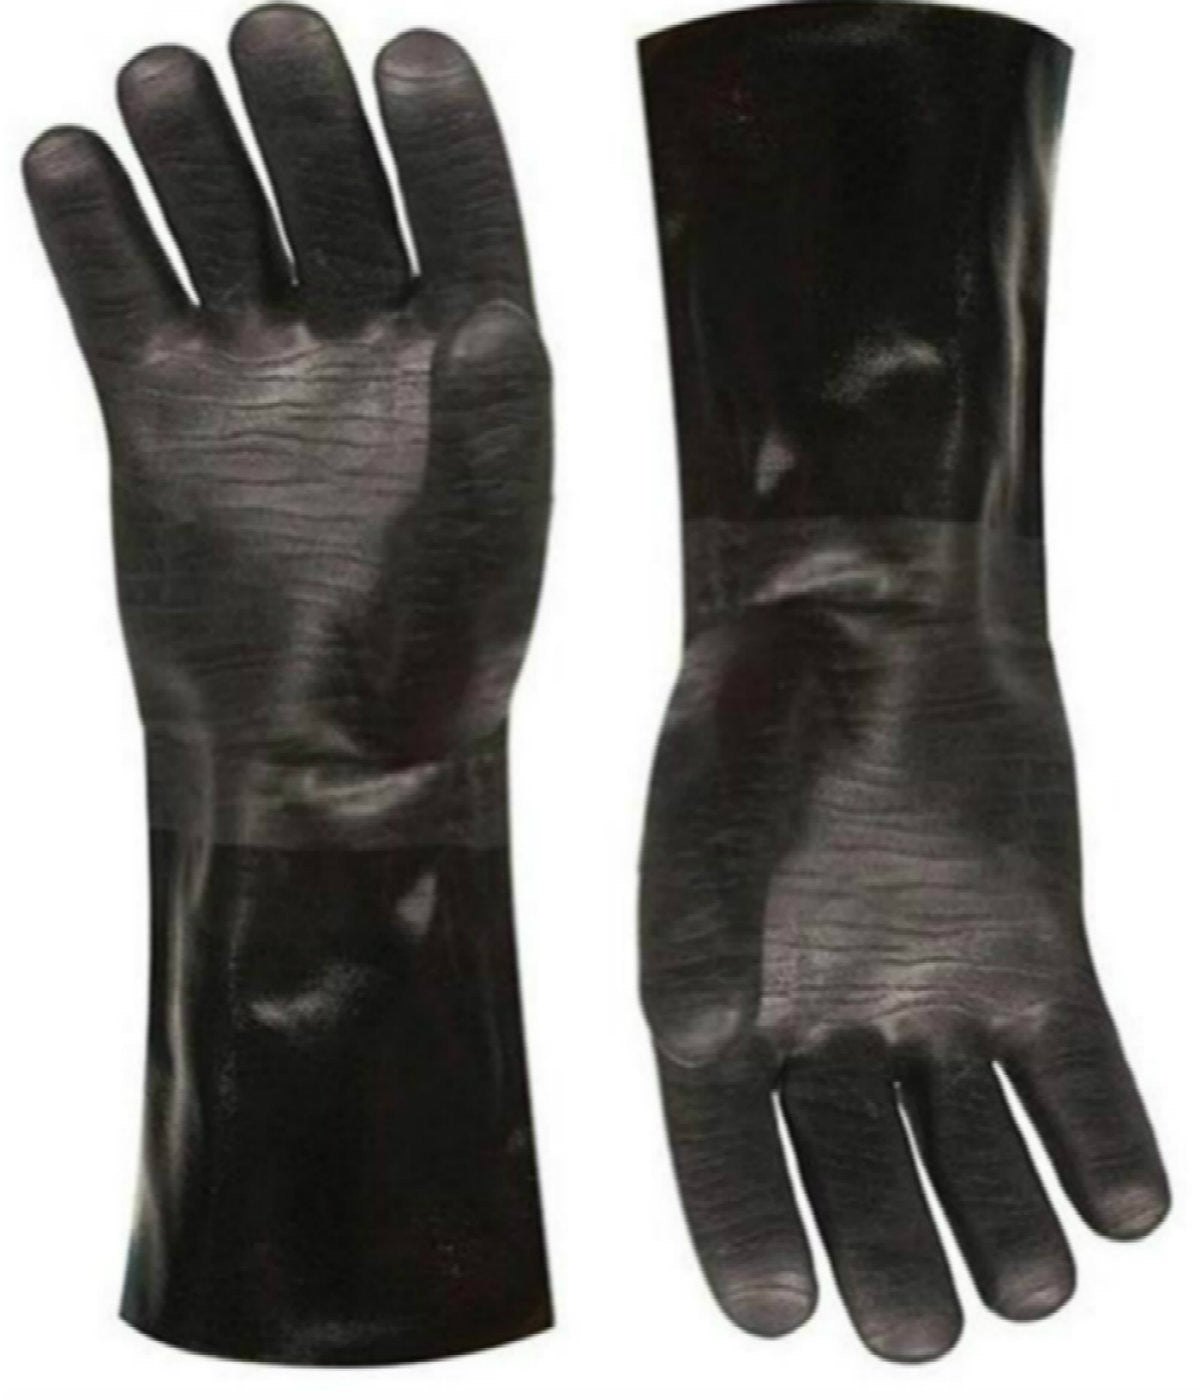 Artisan Griller BBQ heat resistant Insulated smoker/turkey frying/grilling/oven/cooking  and barbecue gloves. -1 pair (14 Inch) Size 10/XL